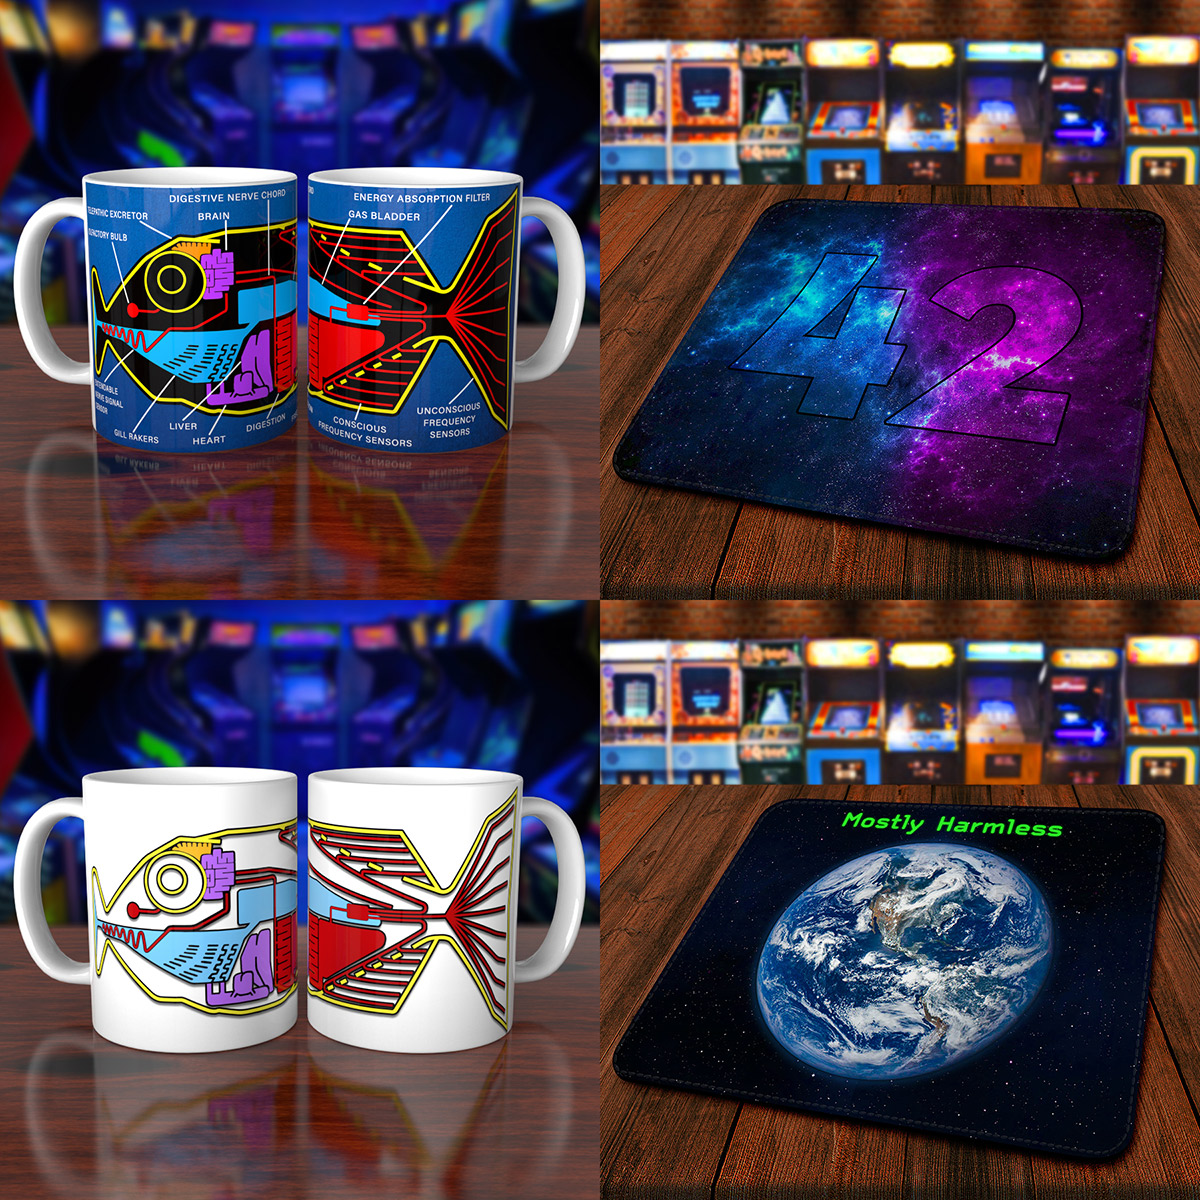 Mike - oldskoolpixels.com on X: Extremely pleased to be able to offer The  Hitchhiker's Guide To The Galaxy Babelfish mousepads and mugs with the  approval and support of the original HHGTTG graphic